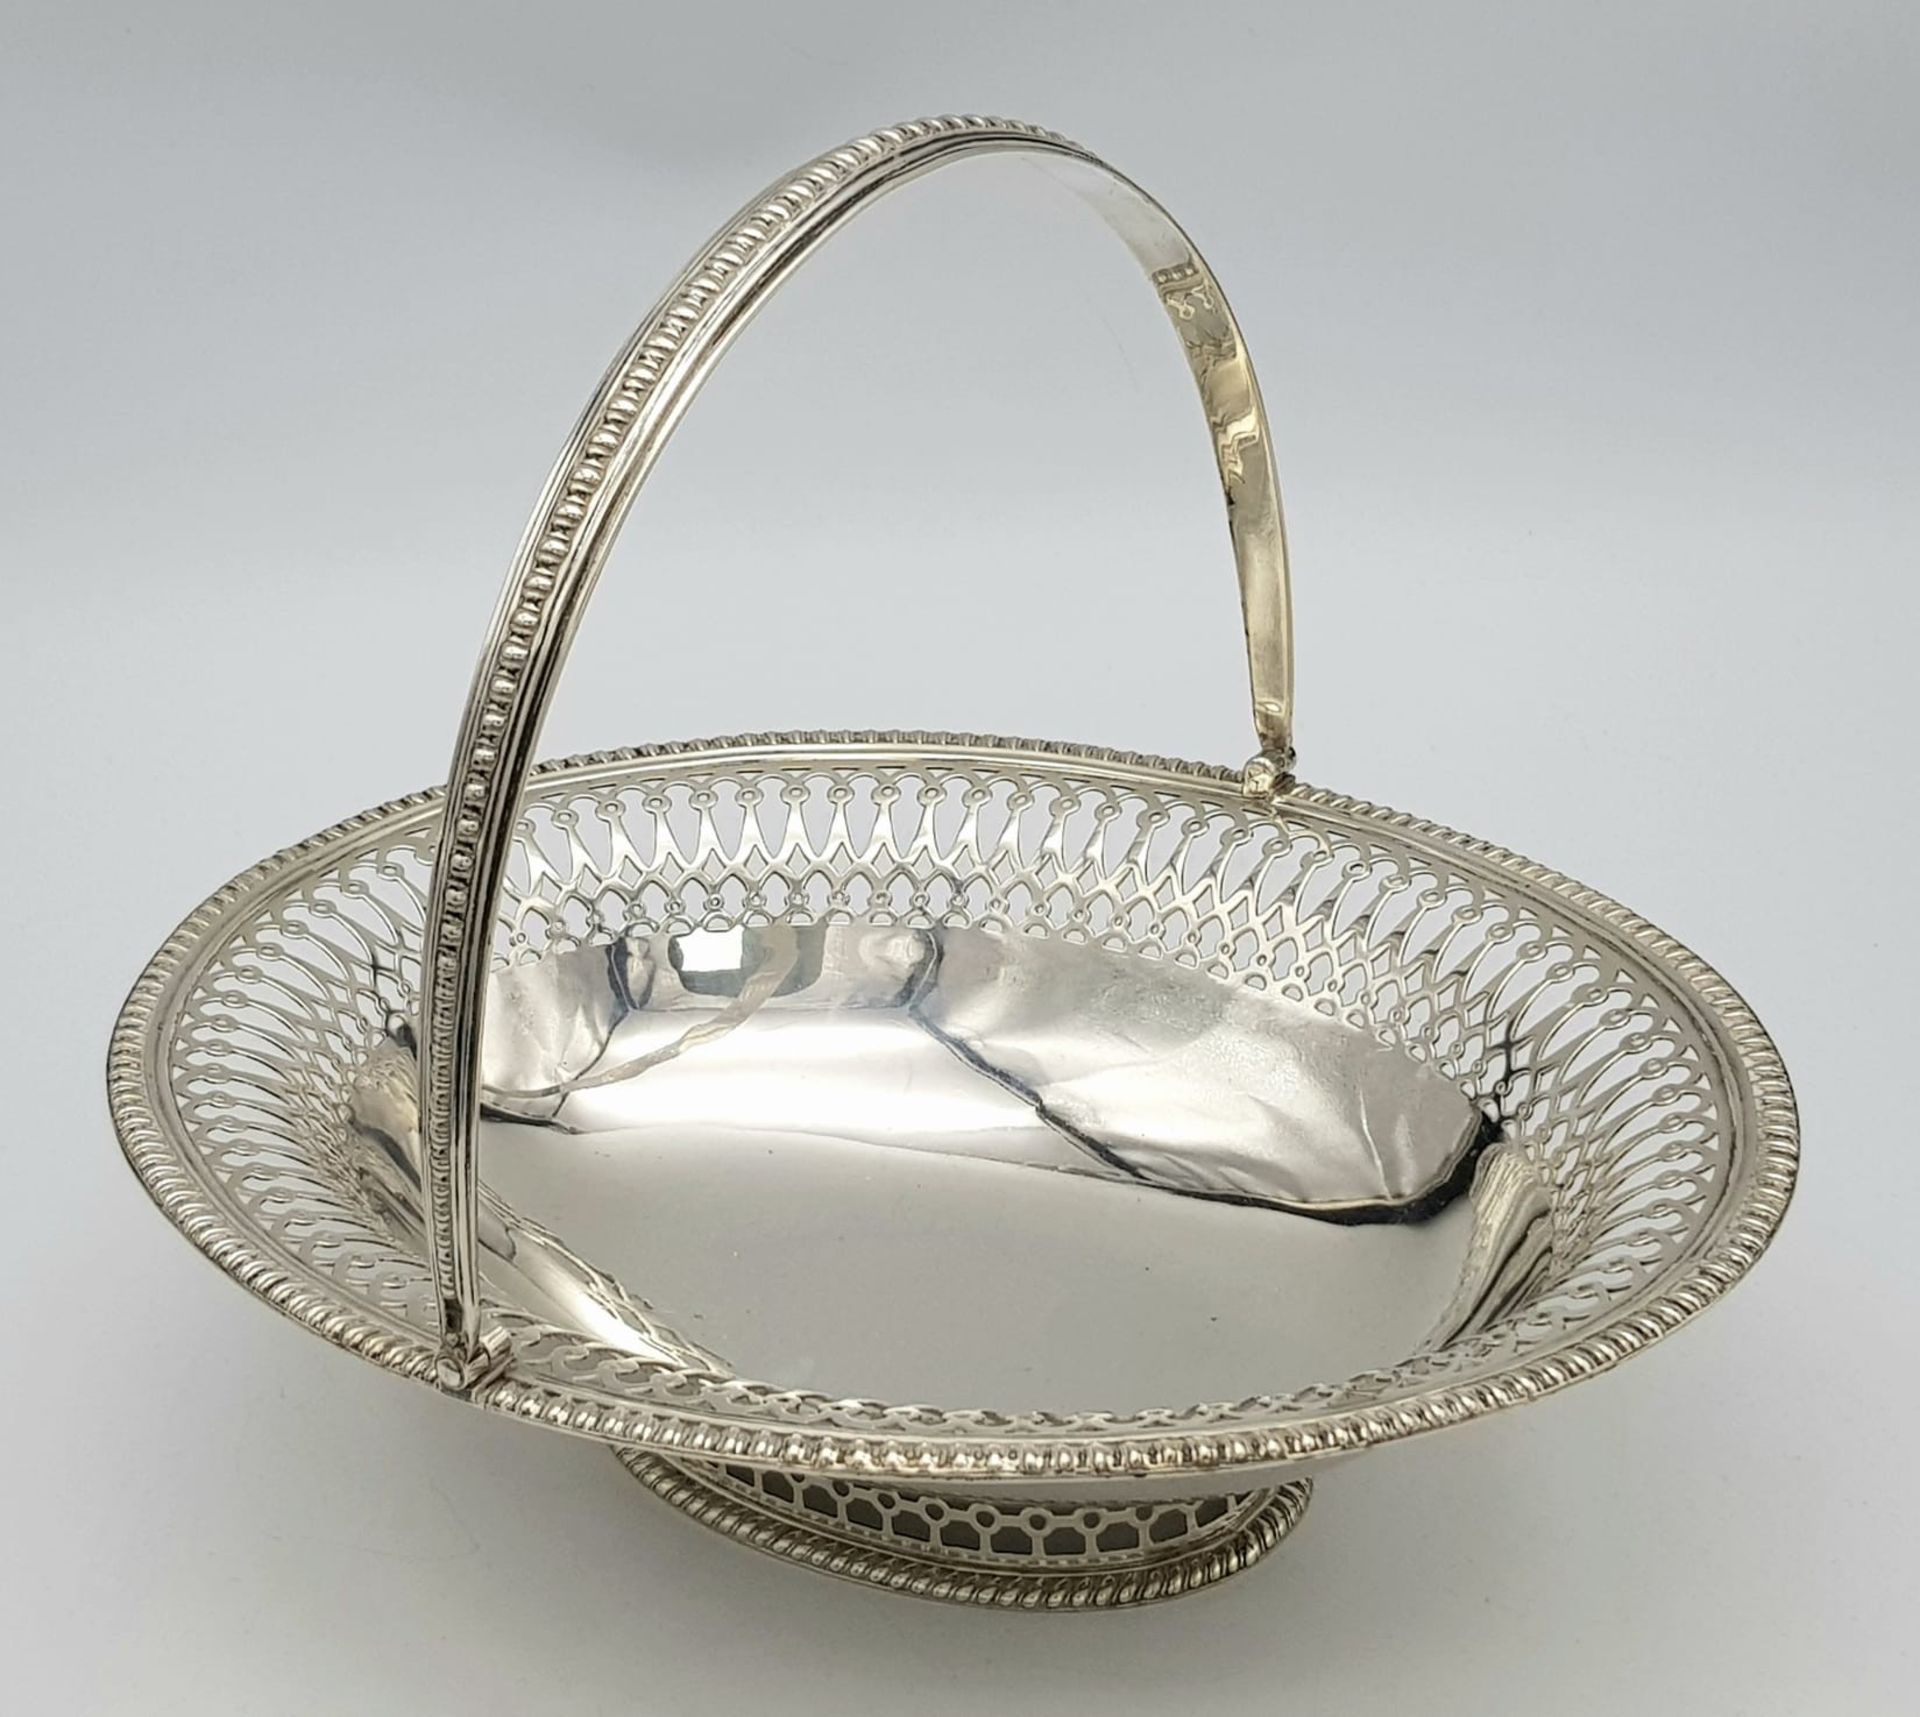 An Antique Sterling Silver Oval Swing Handled Cake/Bread Basket. Pierced geometric and beaded - Image 3 of 9